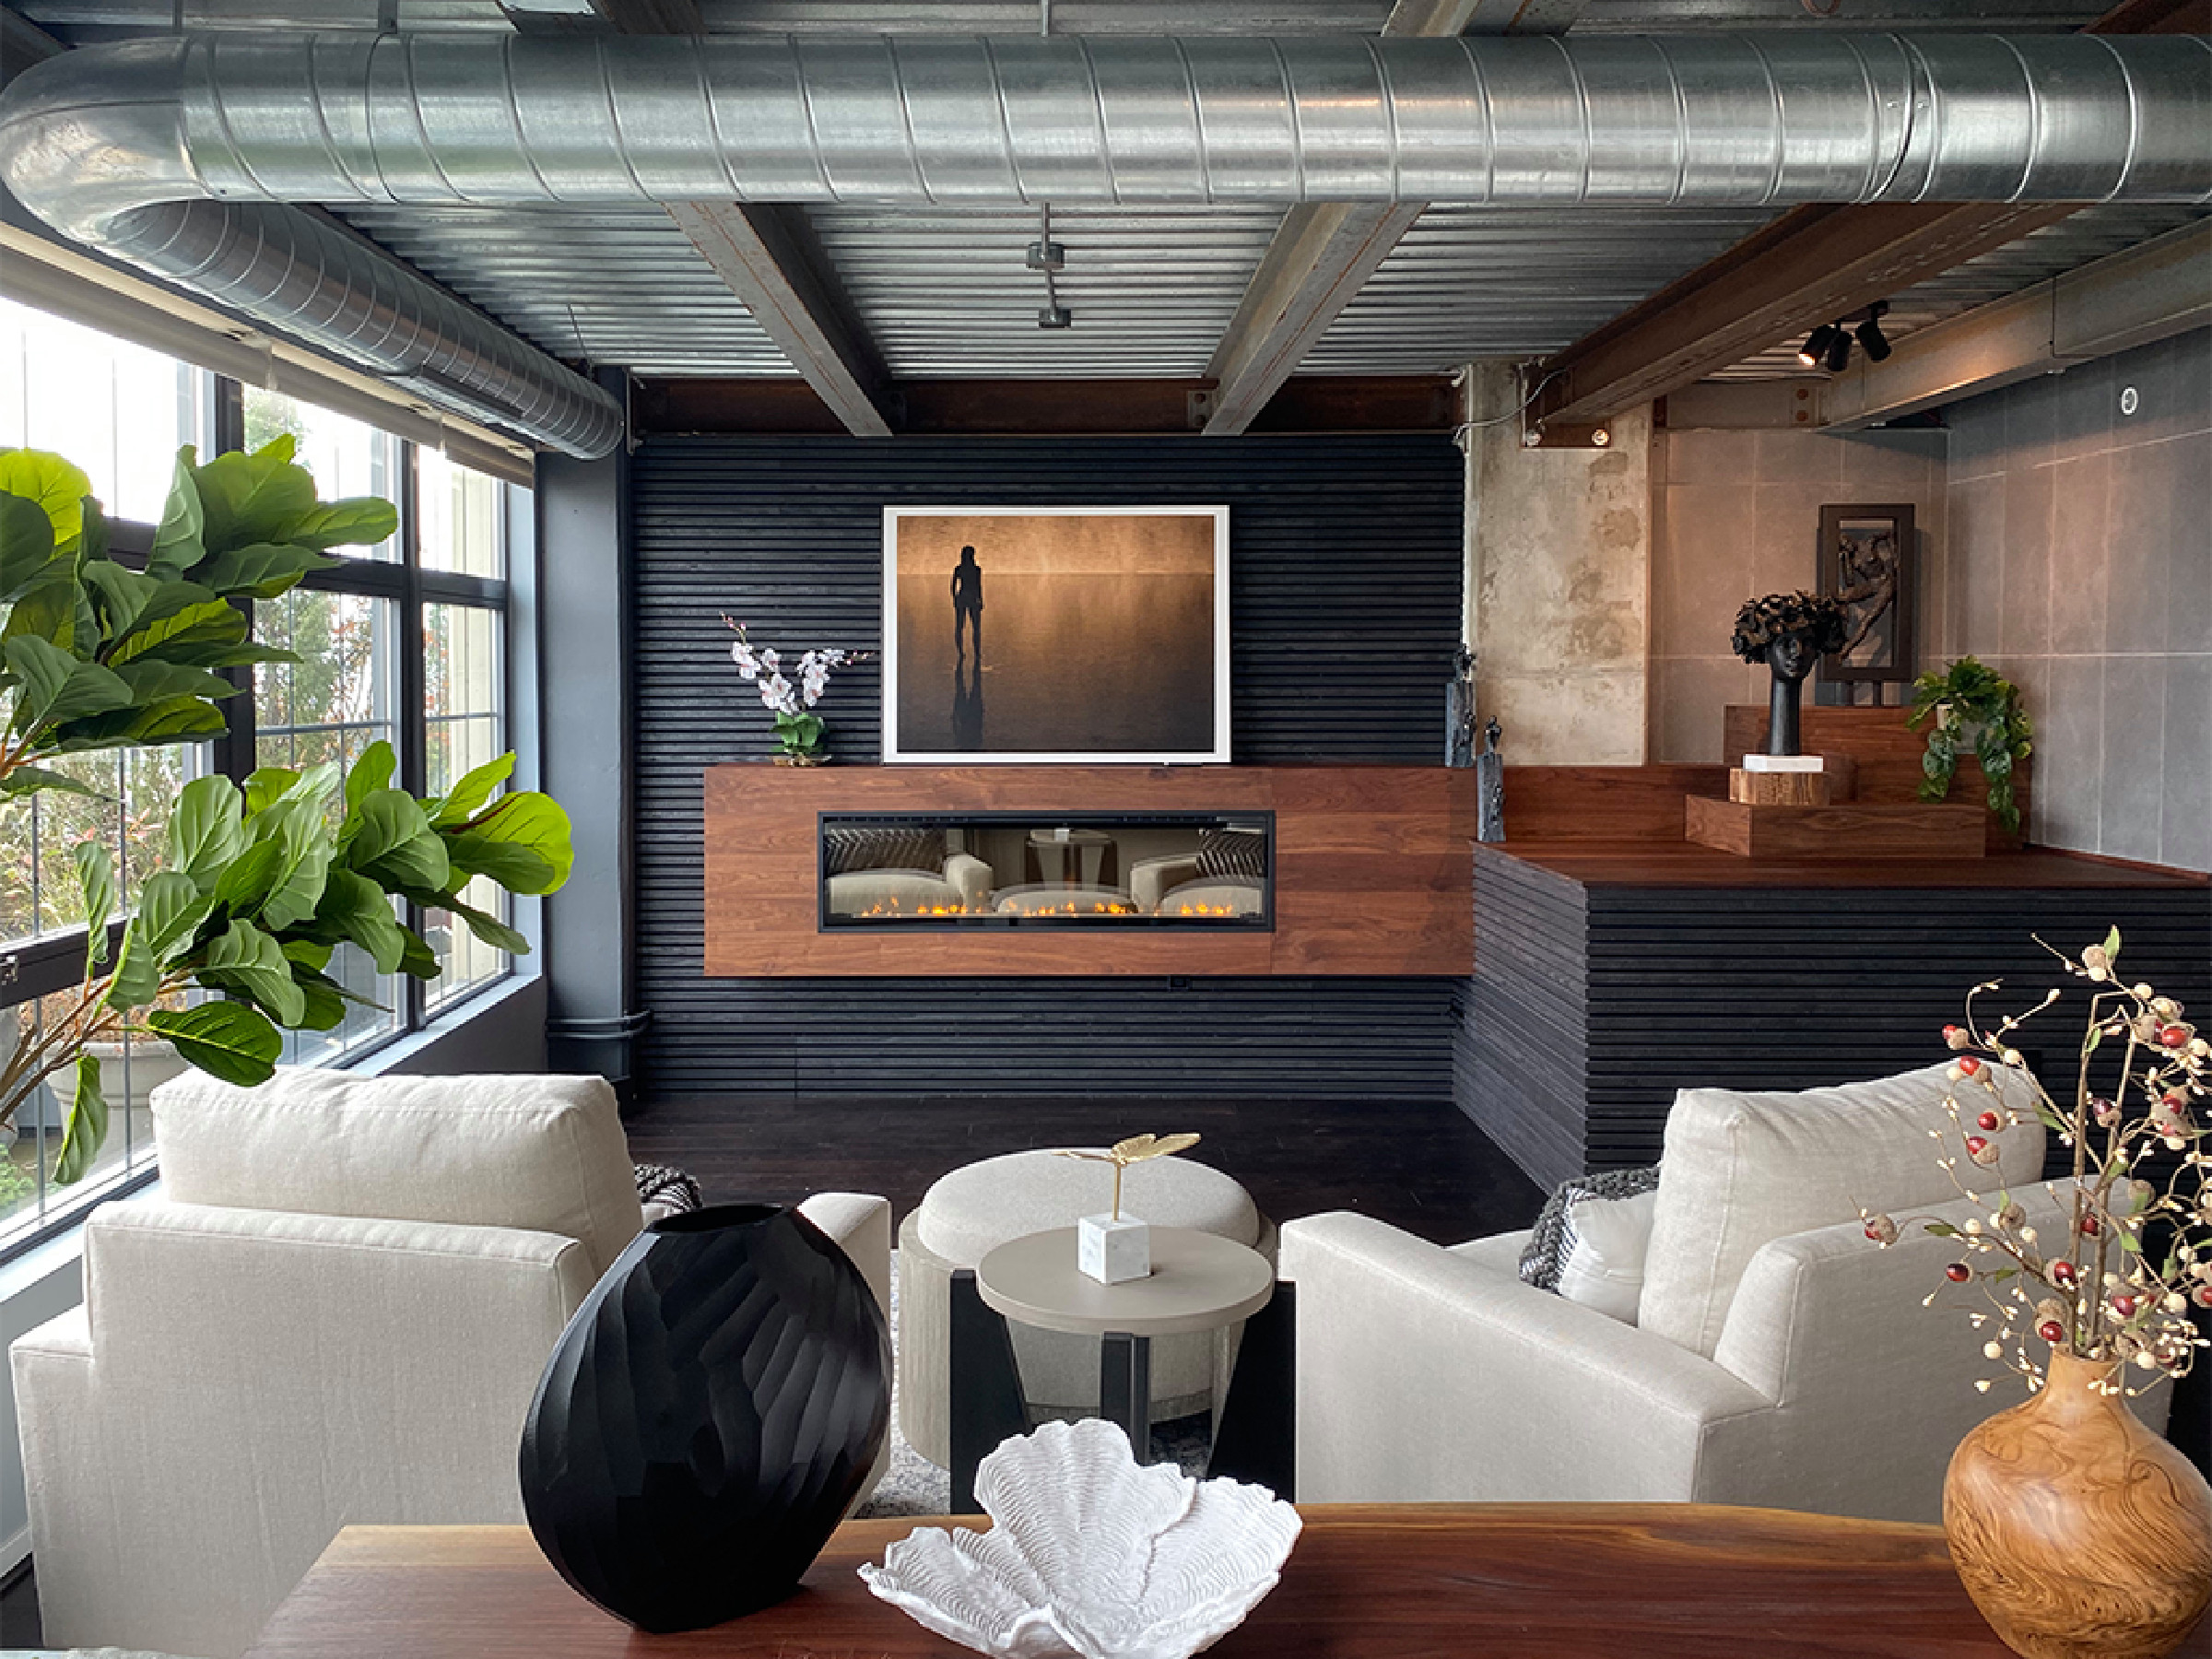 Organic Contemporary Design in an Industrial Setting… Organic Contemporary elements in an industrial building is a natural fit. Turner Design Firm designers Tessea McCrary and Jeanine Turner created a